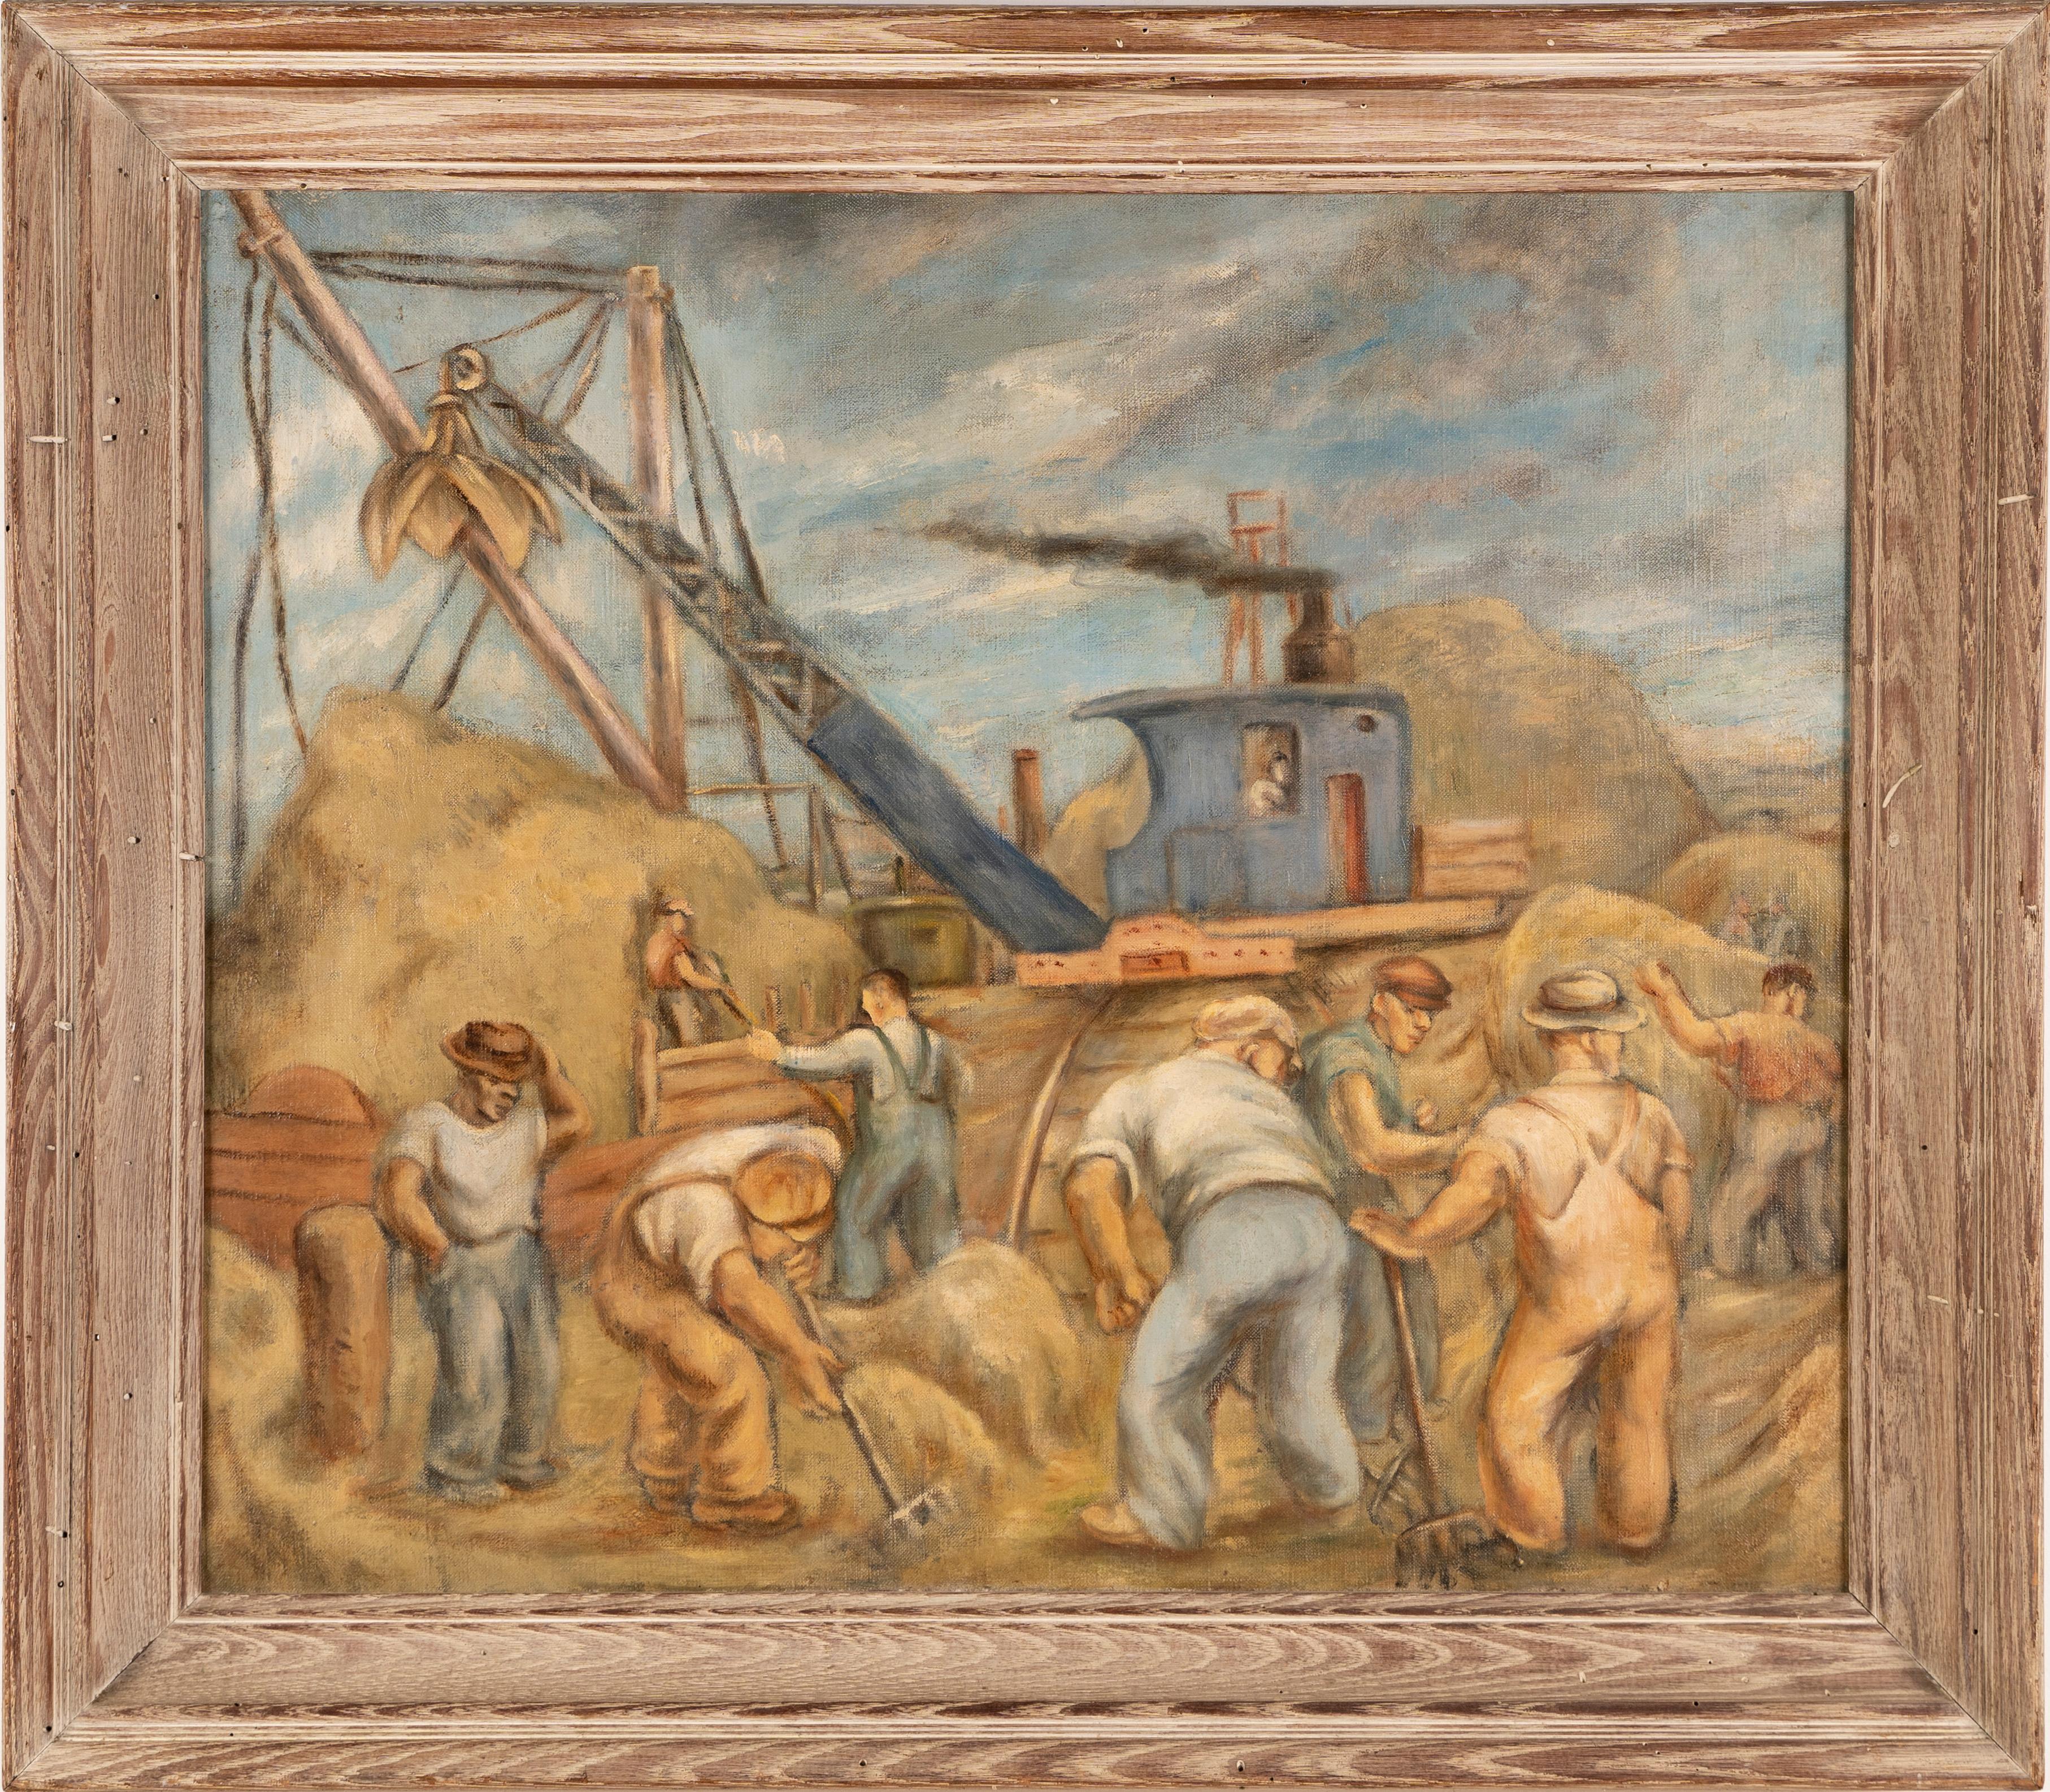 Antique American Modernist WPA Workers Industrial Landscape Framed Oil Painting - Brown Landscape Painting by Unknown